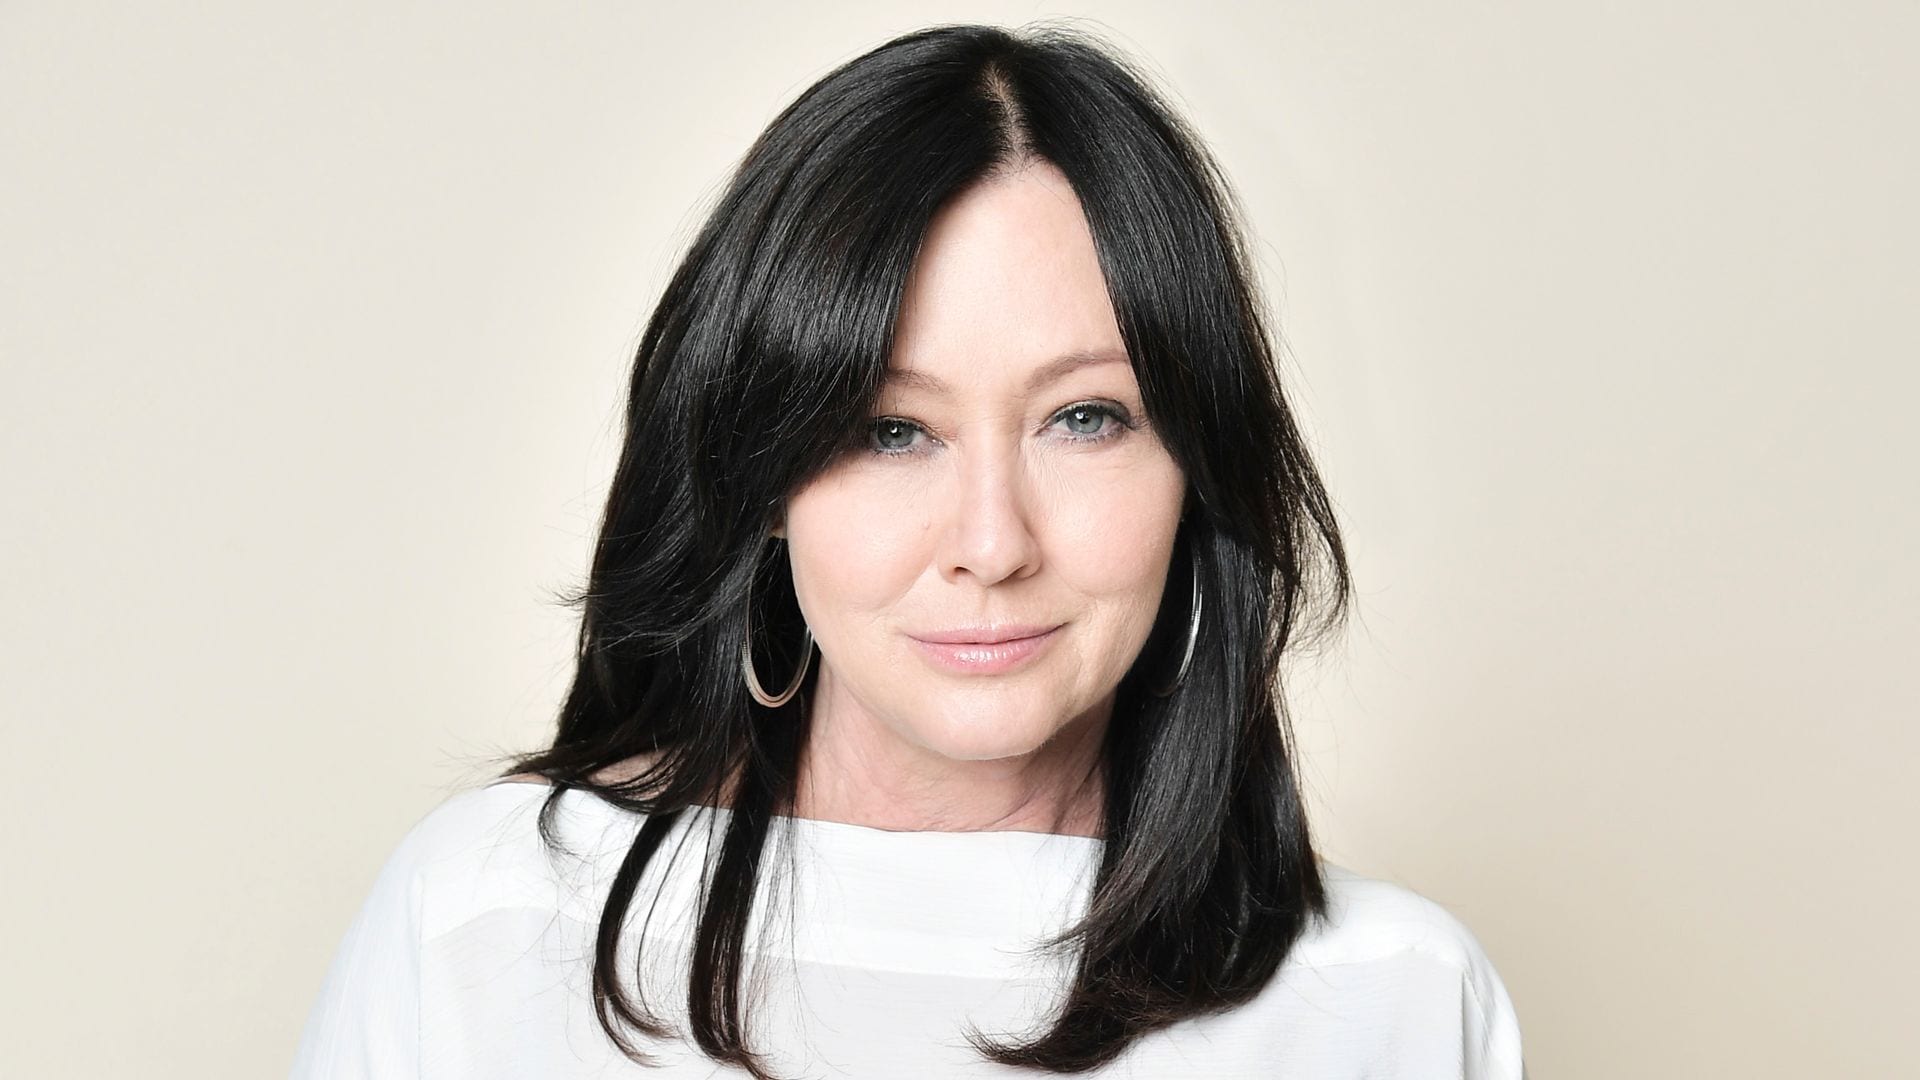 Shannen Doherty left funeral plans and instructions after her death